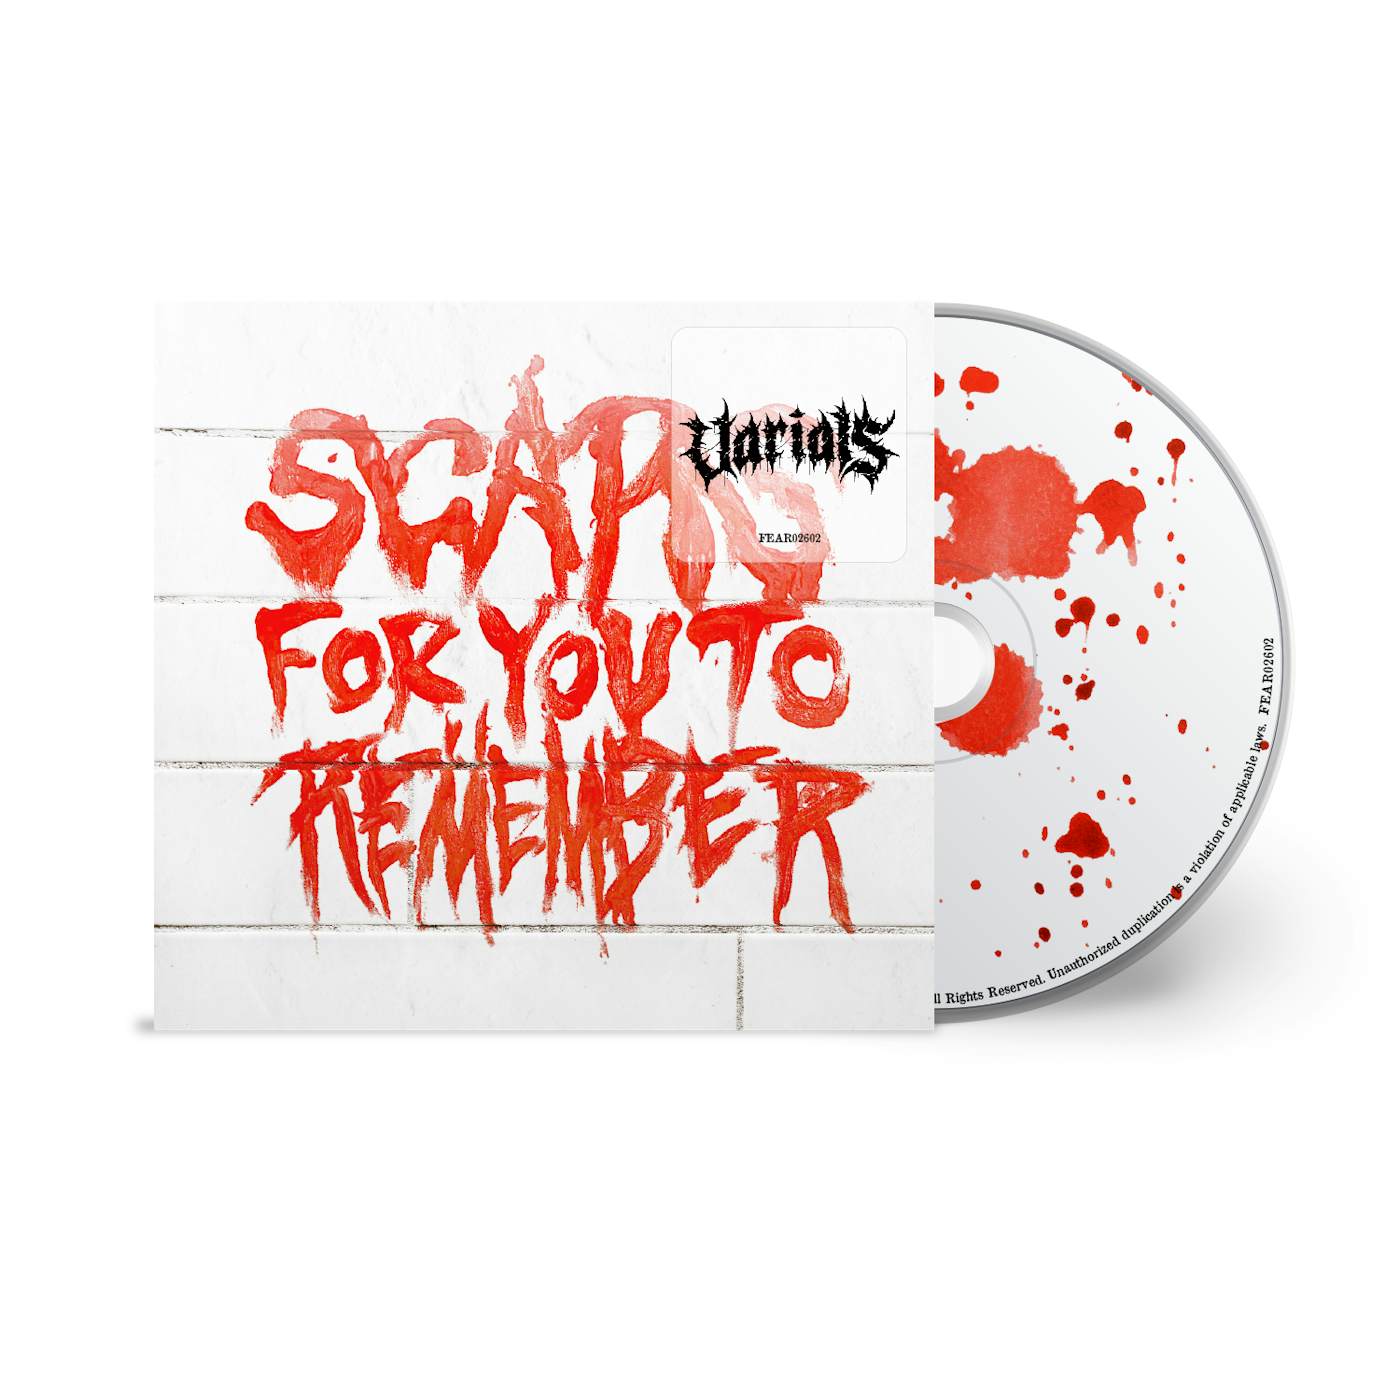 Varials "Scars For You To Remember" CD